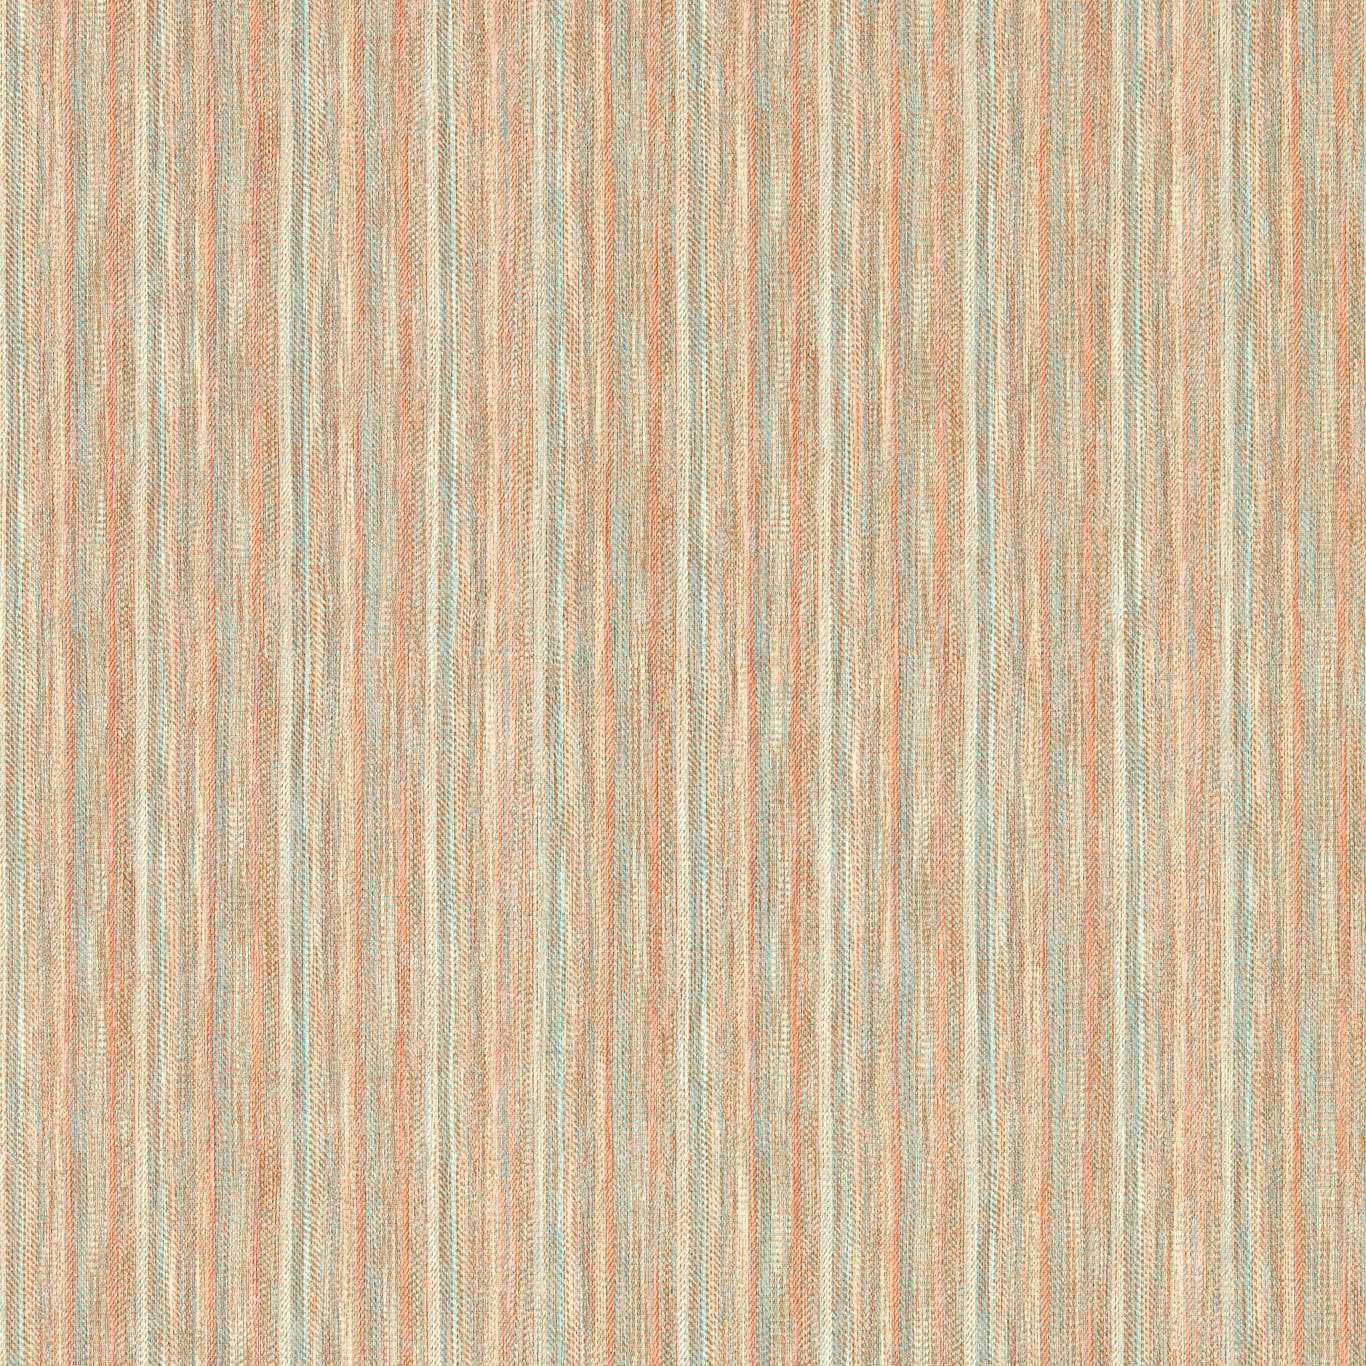 Palla Rosewood/Seaglass Wallpaper by HAR